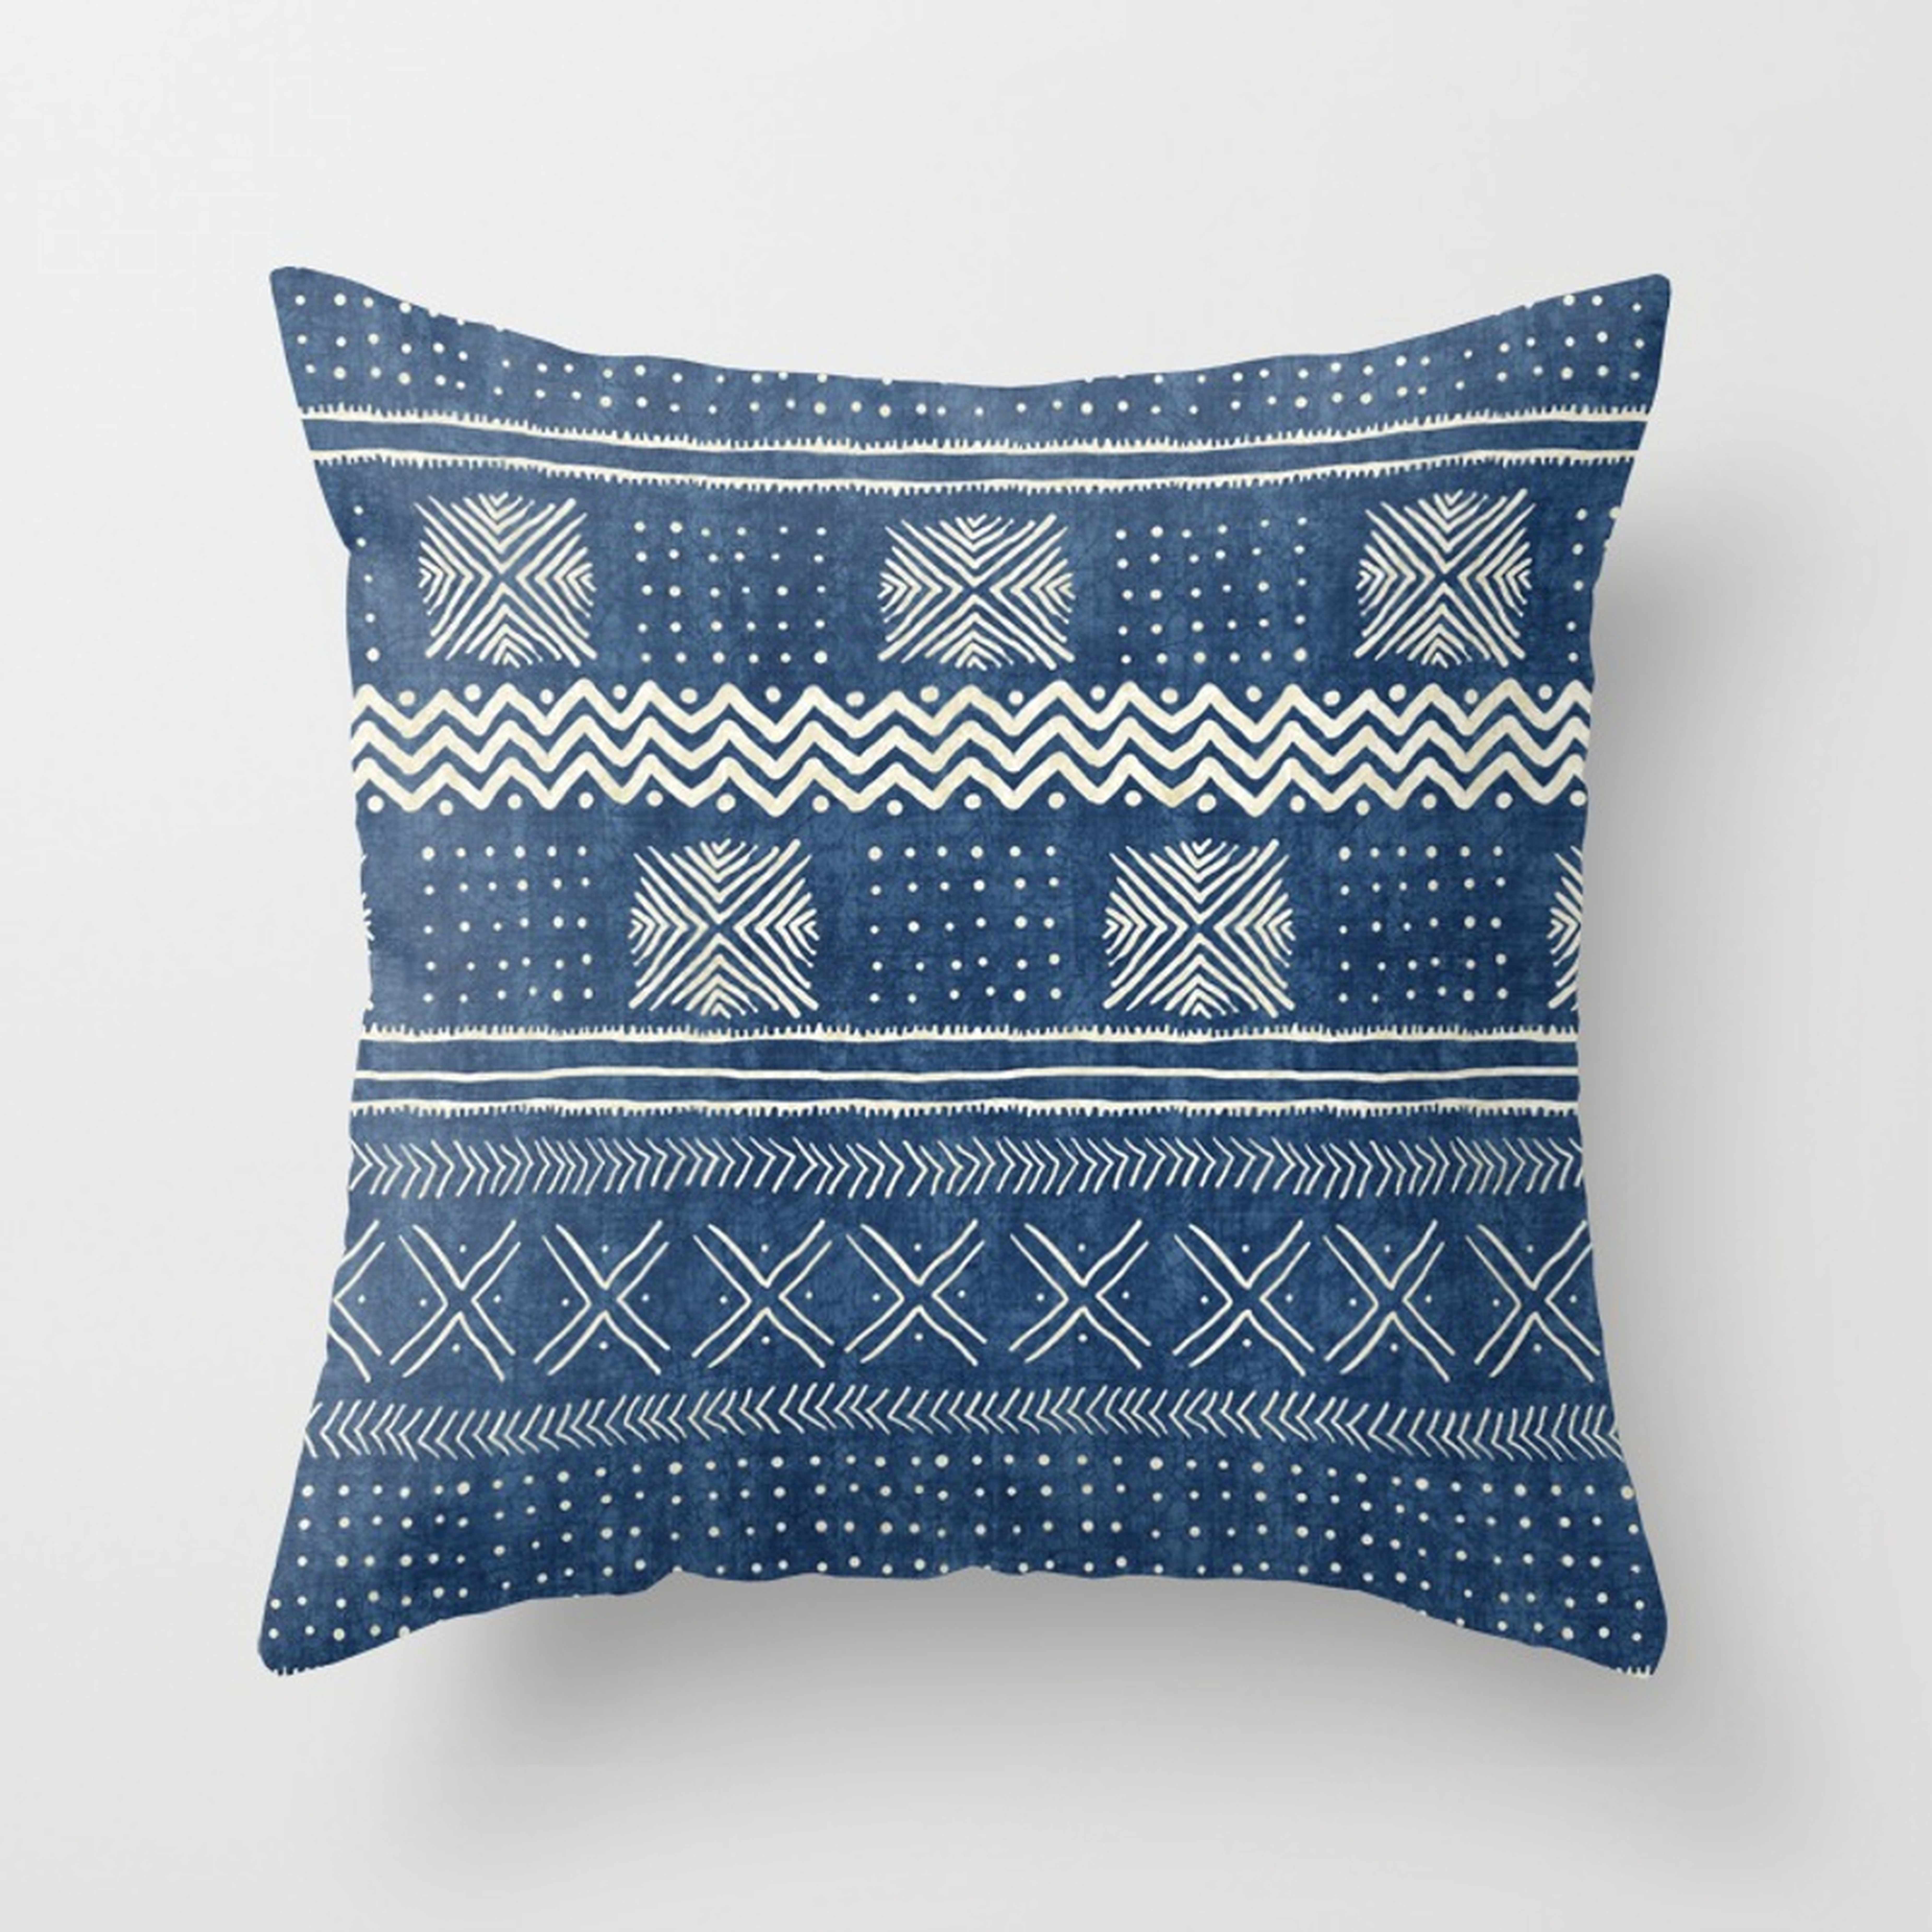 Geometric Stripe Blue Throw Pillow by House Of Haha - Cover (20" x 20") With Pillow Insert - Indoor Pillow - Society6